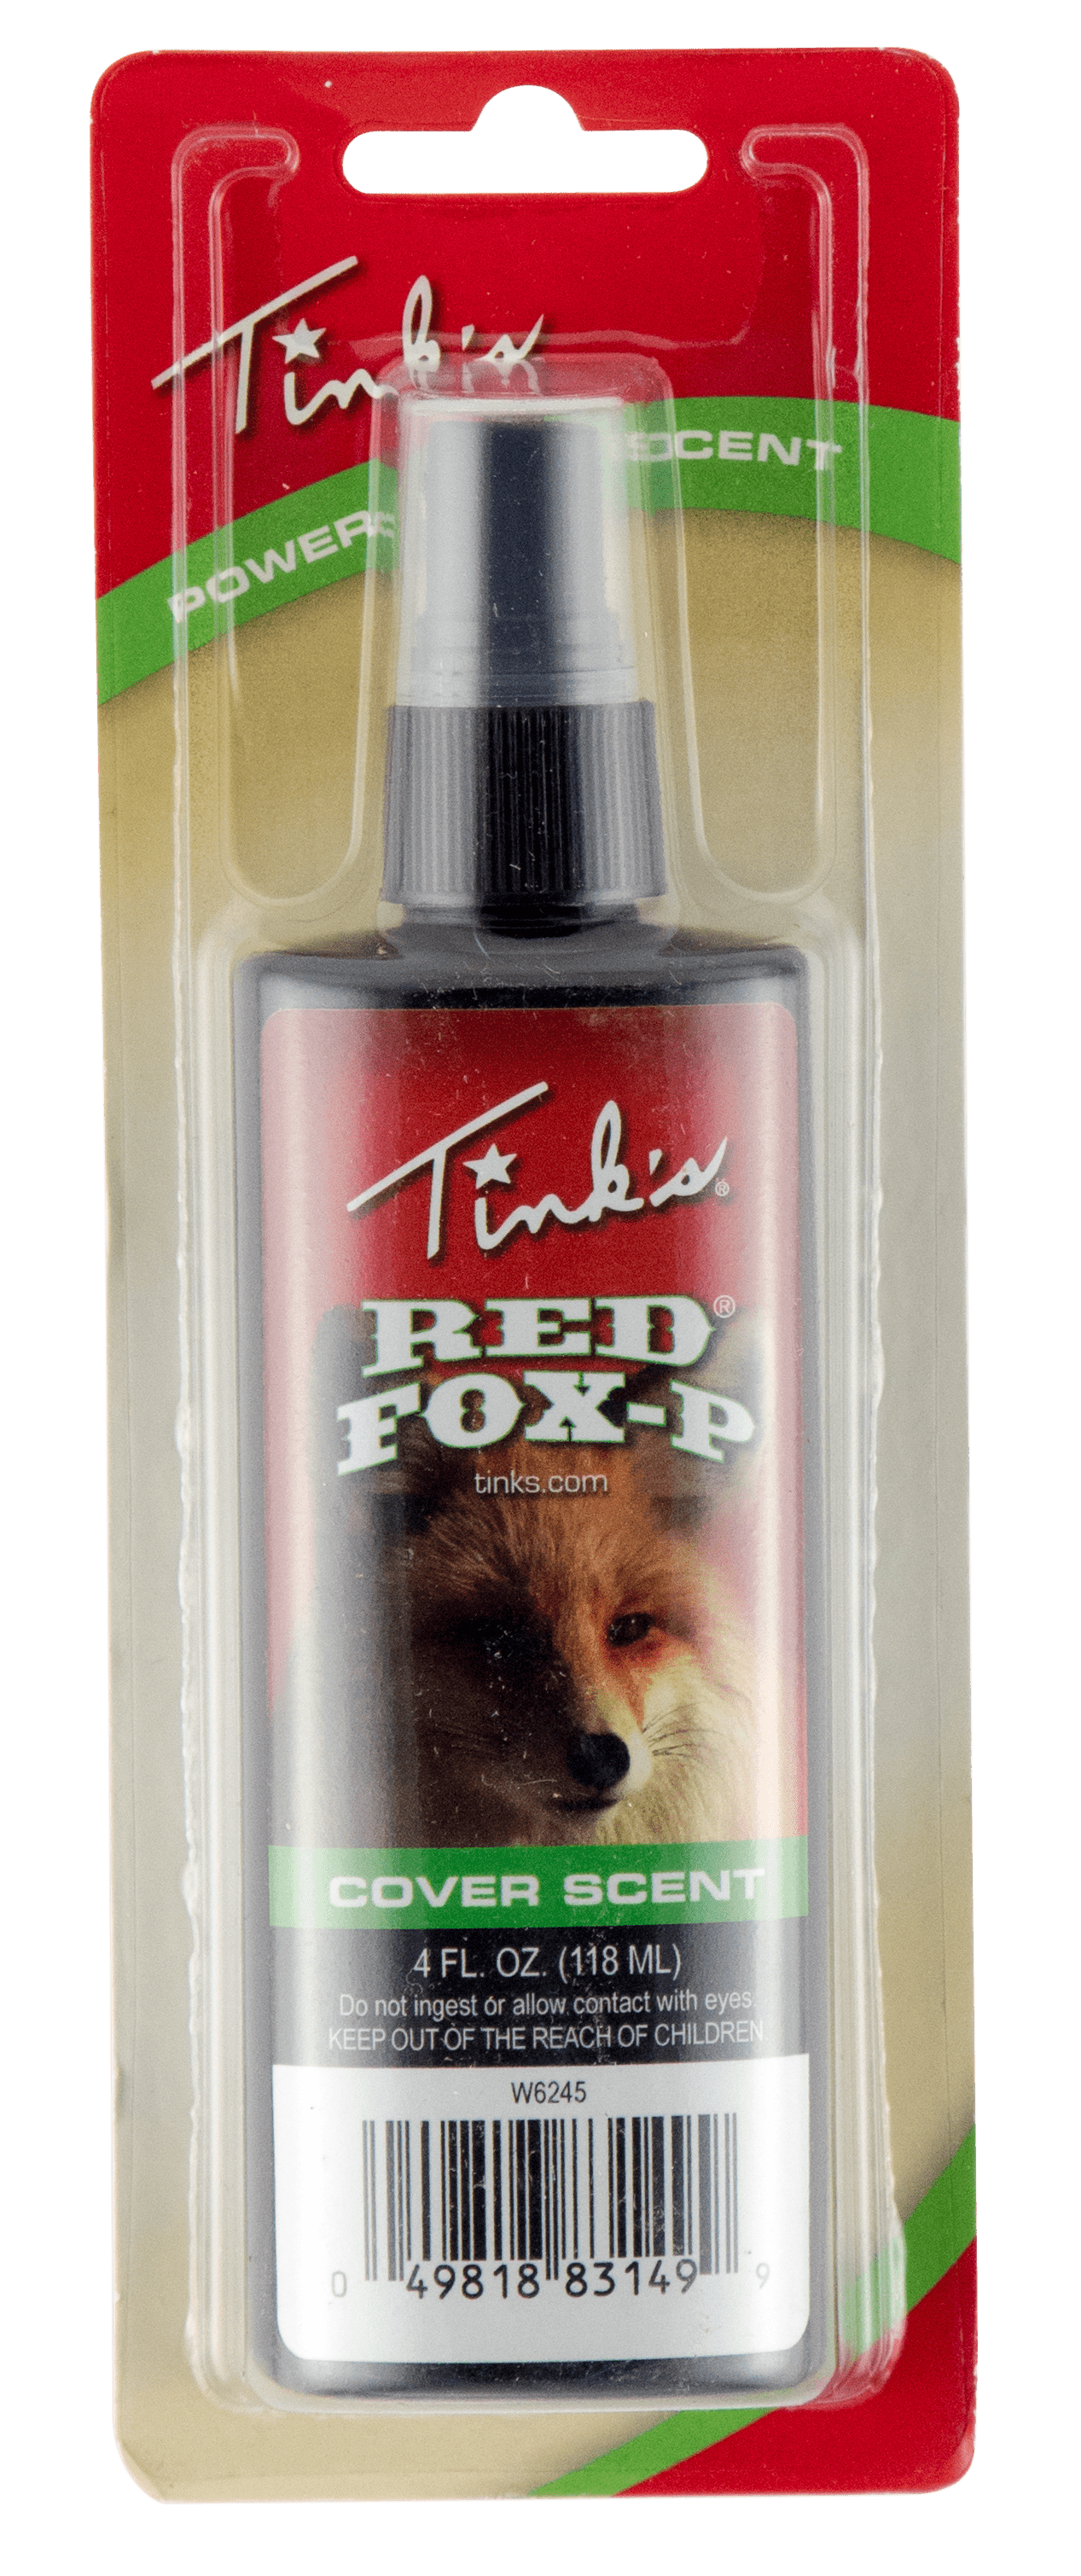 Tinks Tinks Red Fox-p Power Cover Scent 4 Oz. Hunting